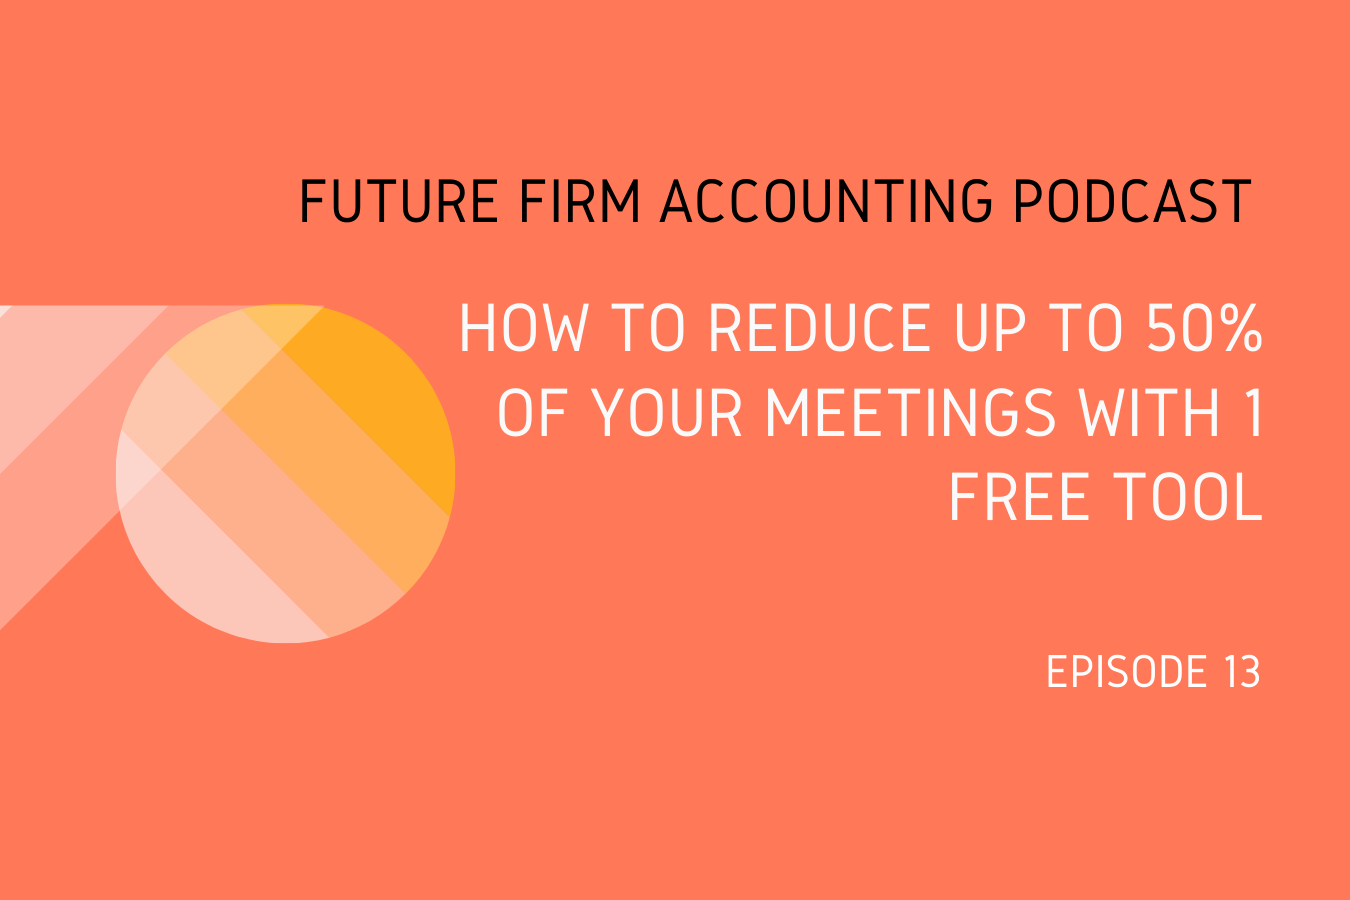 How to Reduce up to 50% of Your Meetings With 1 Free Tool